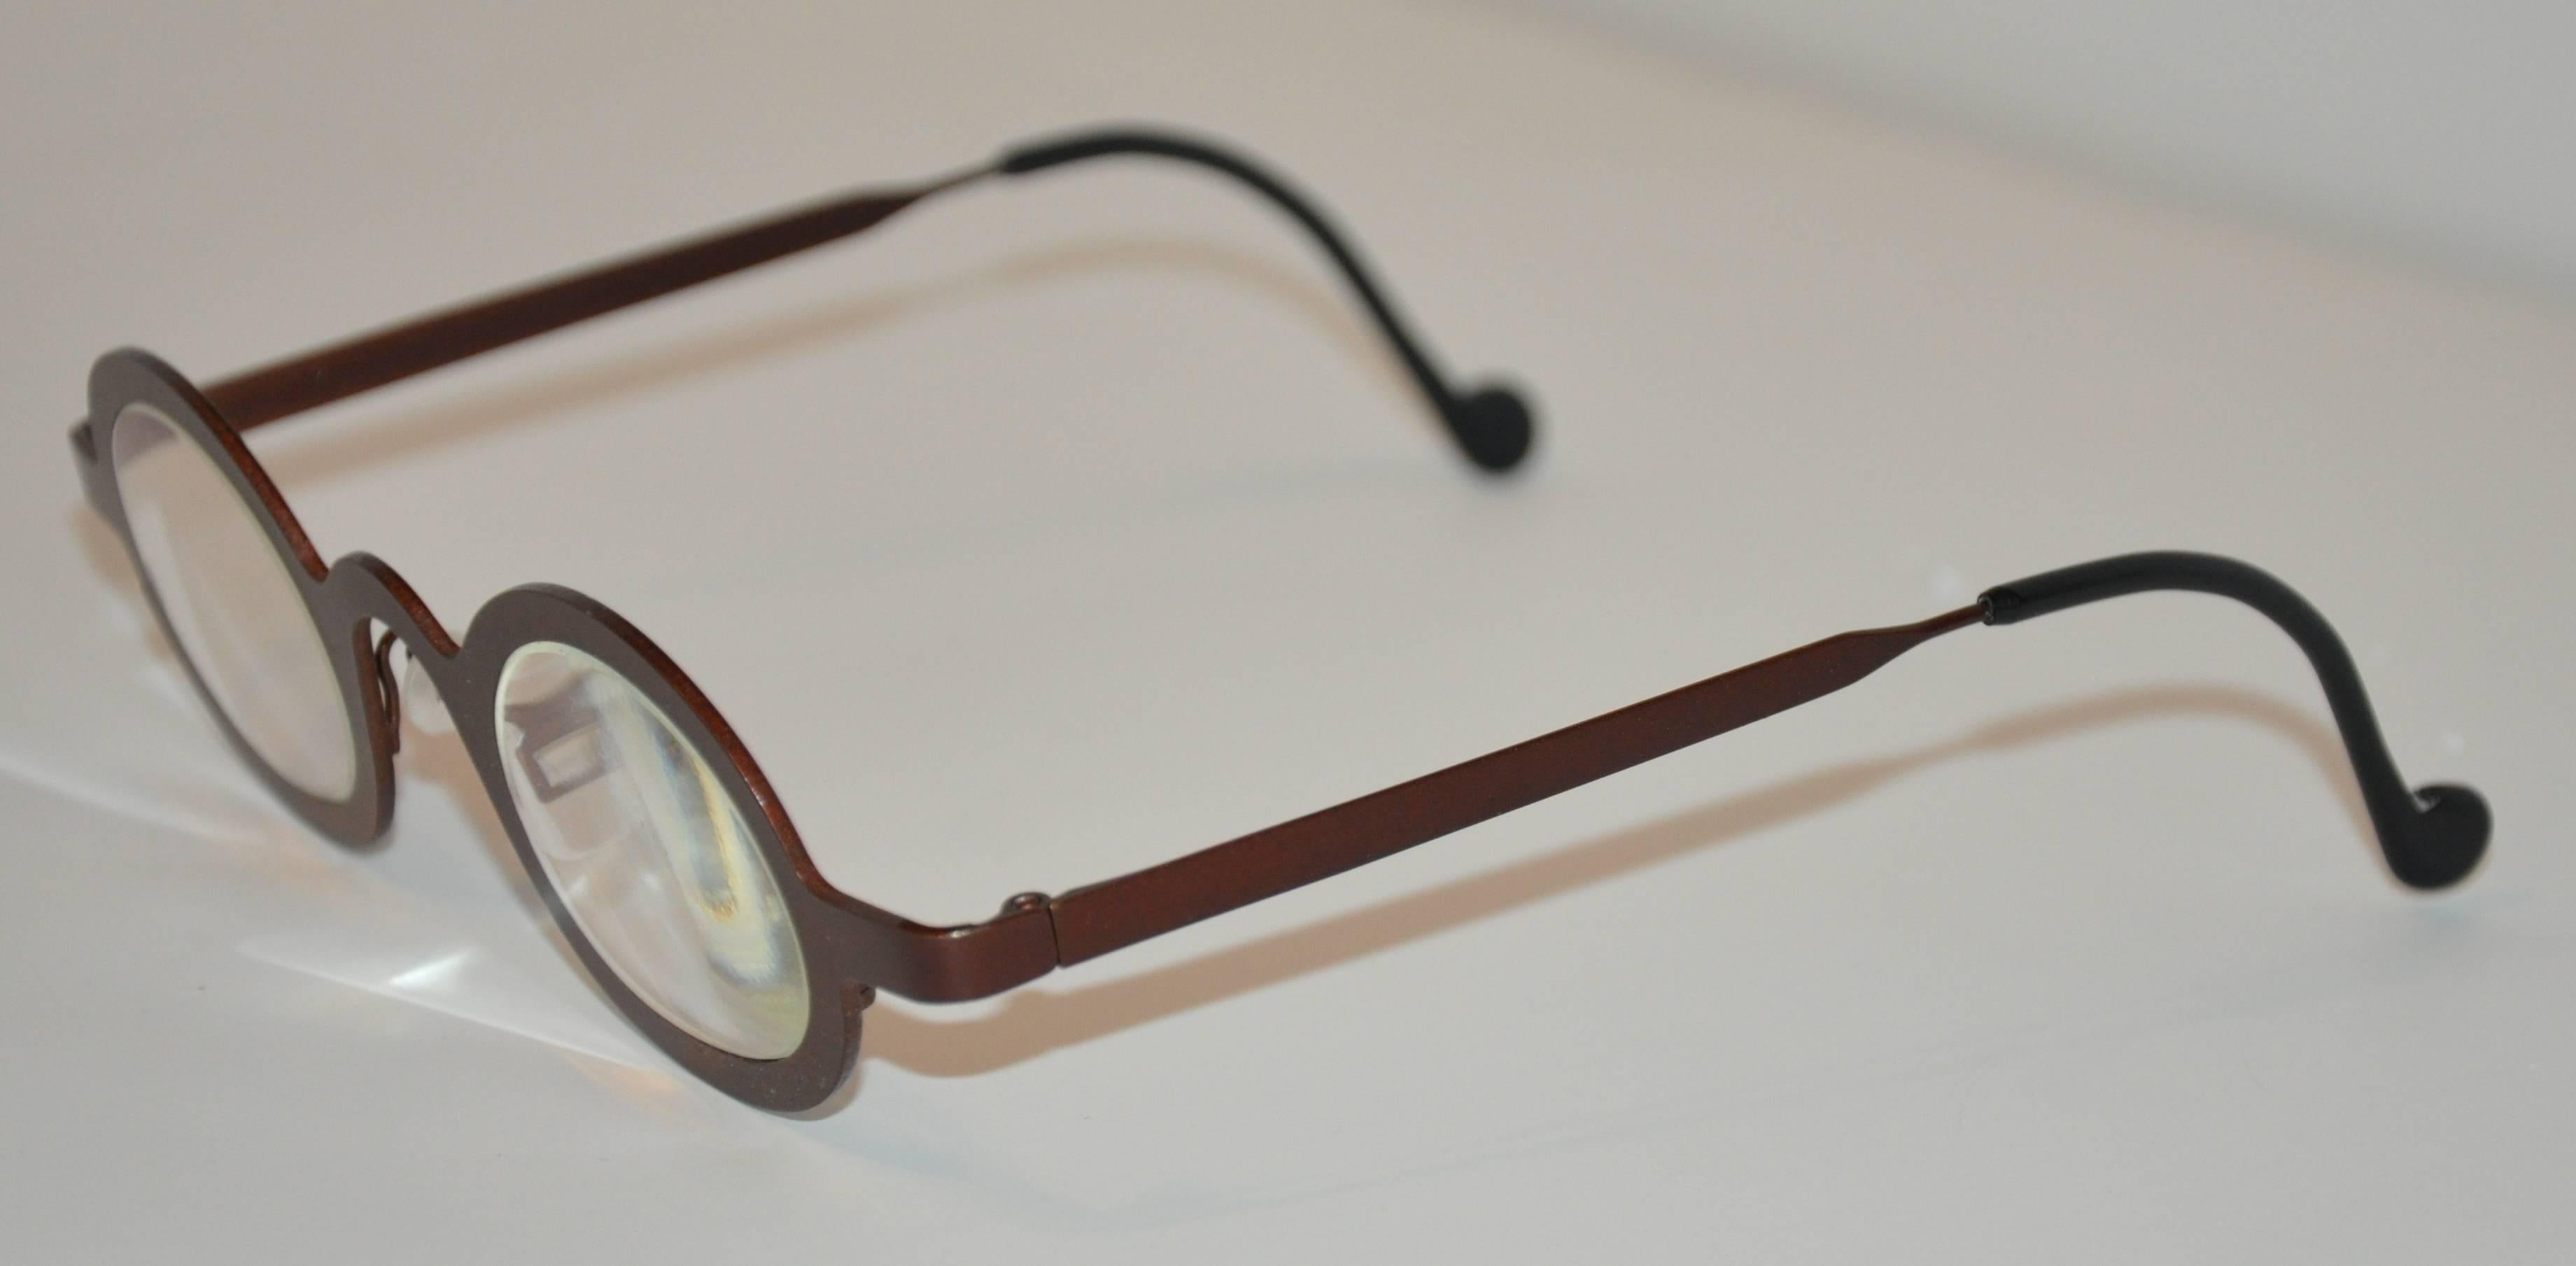        Theo (Belgium) "Keith" steel-bronze prescription glasses measures 5 3/8" in length across the front. The height measures 1 9/16", arms are 5 3/8" accented with black lucite. Made in Belgium.